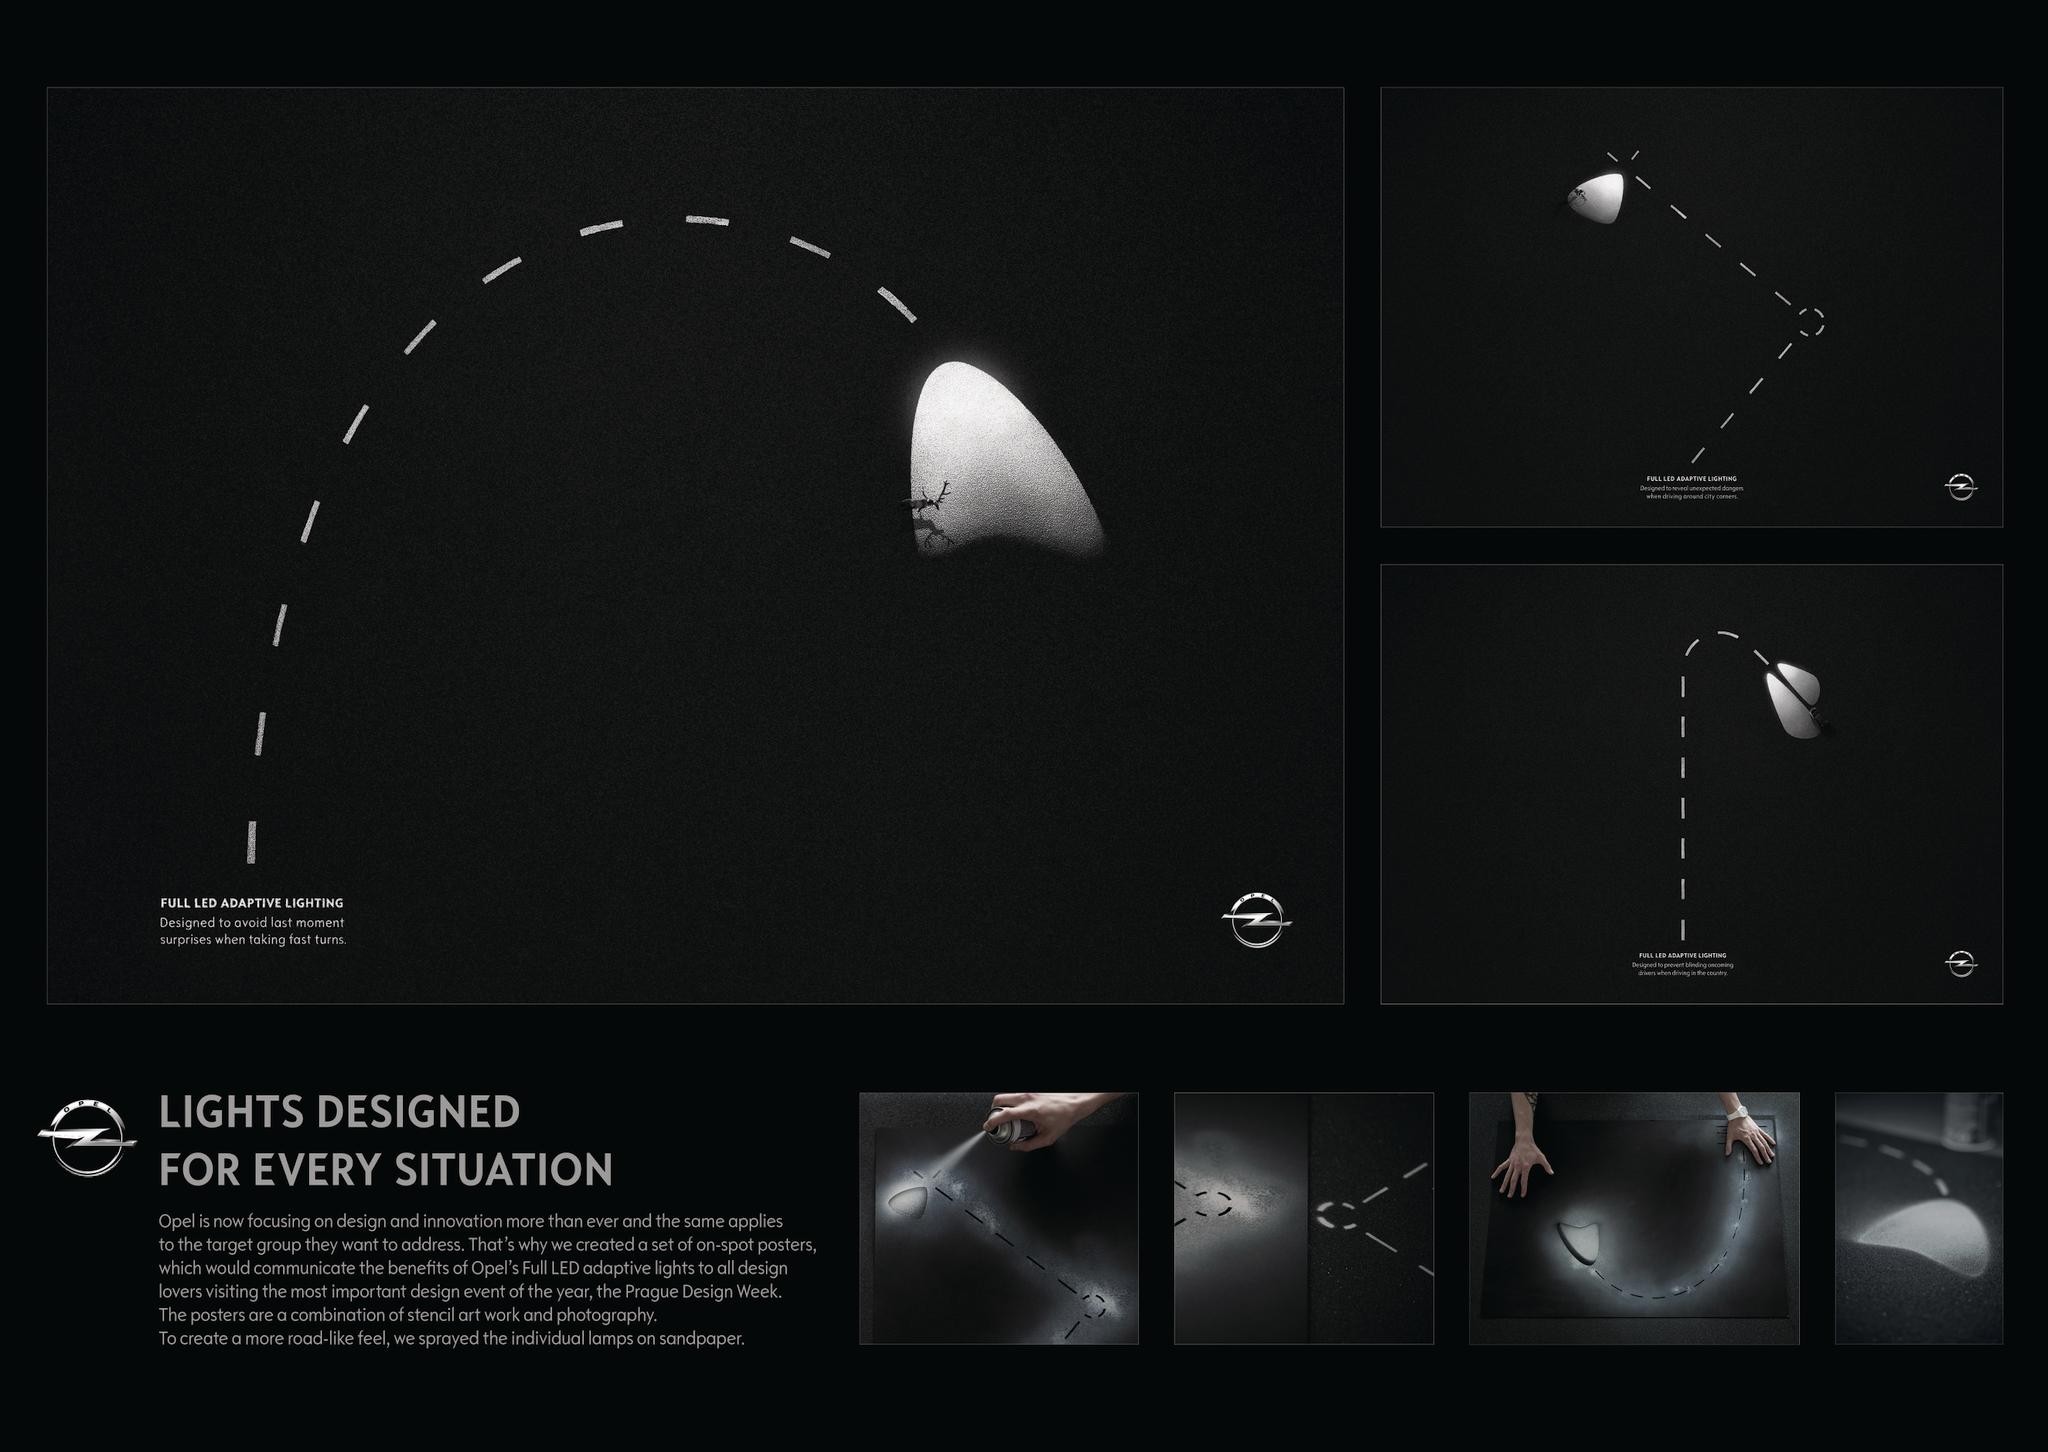 Lights Designed for Every Situation - Curve Light